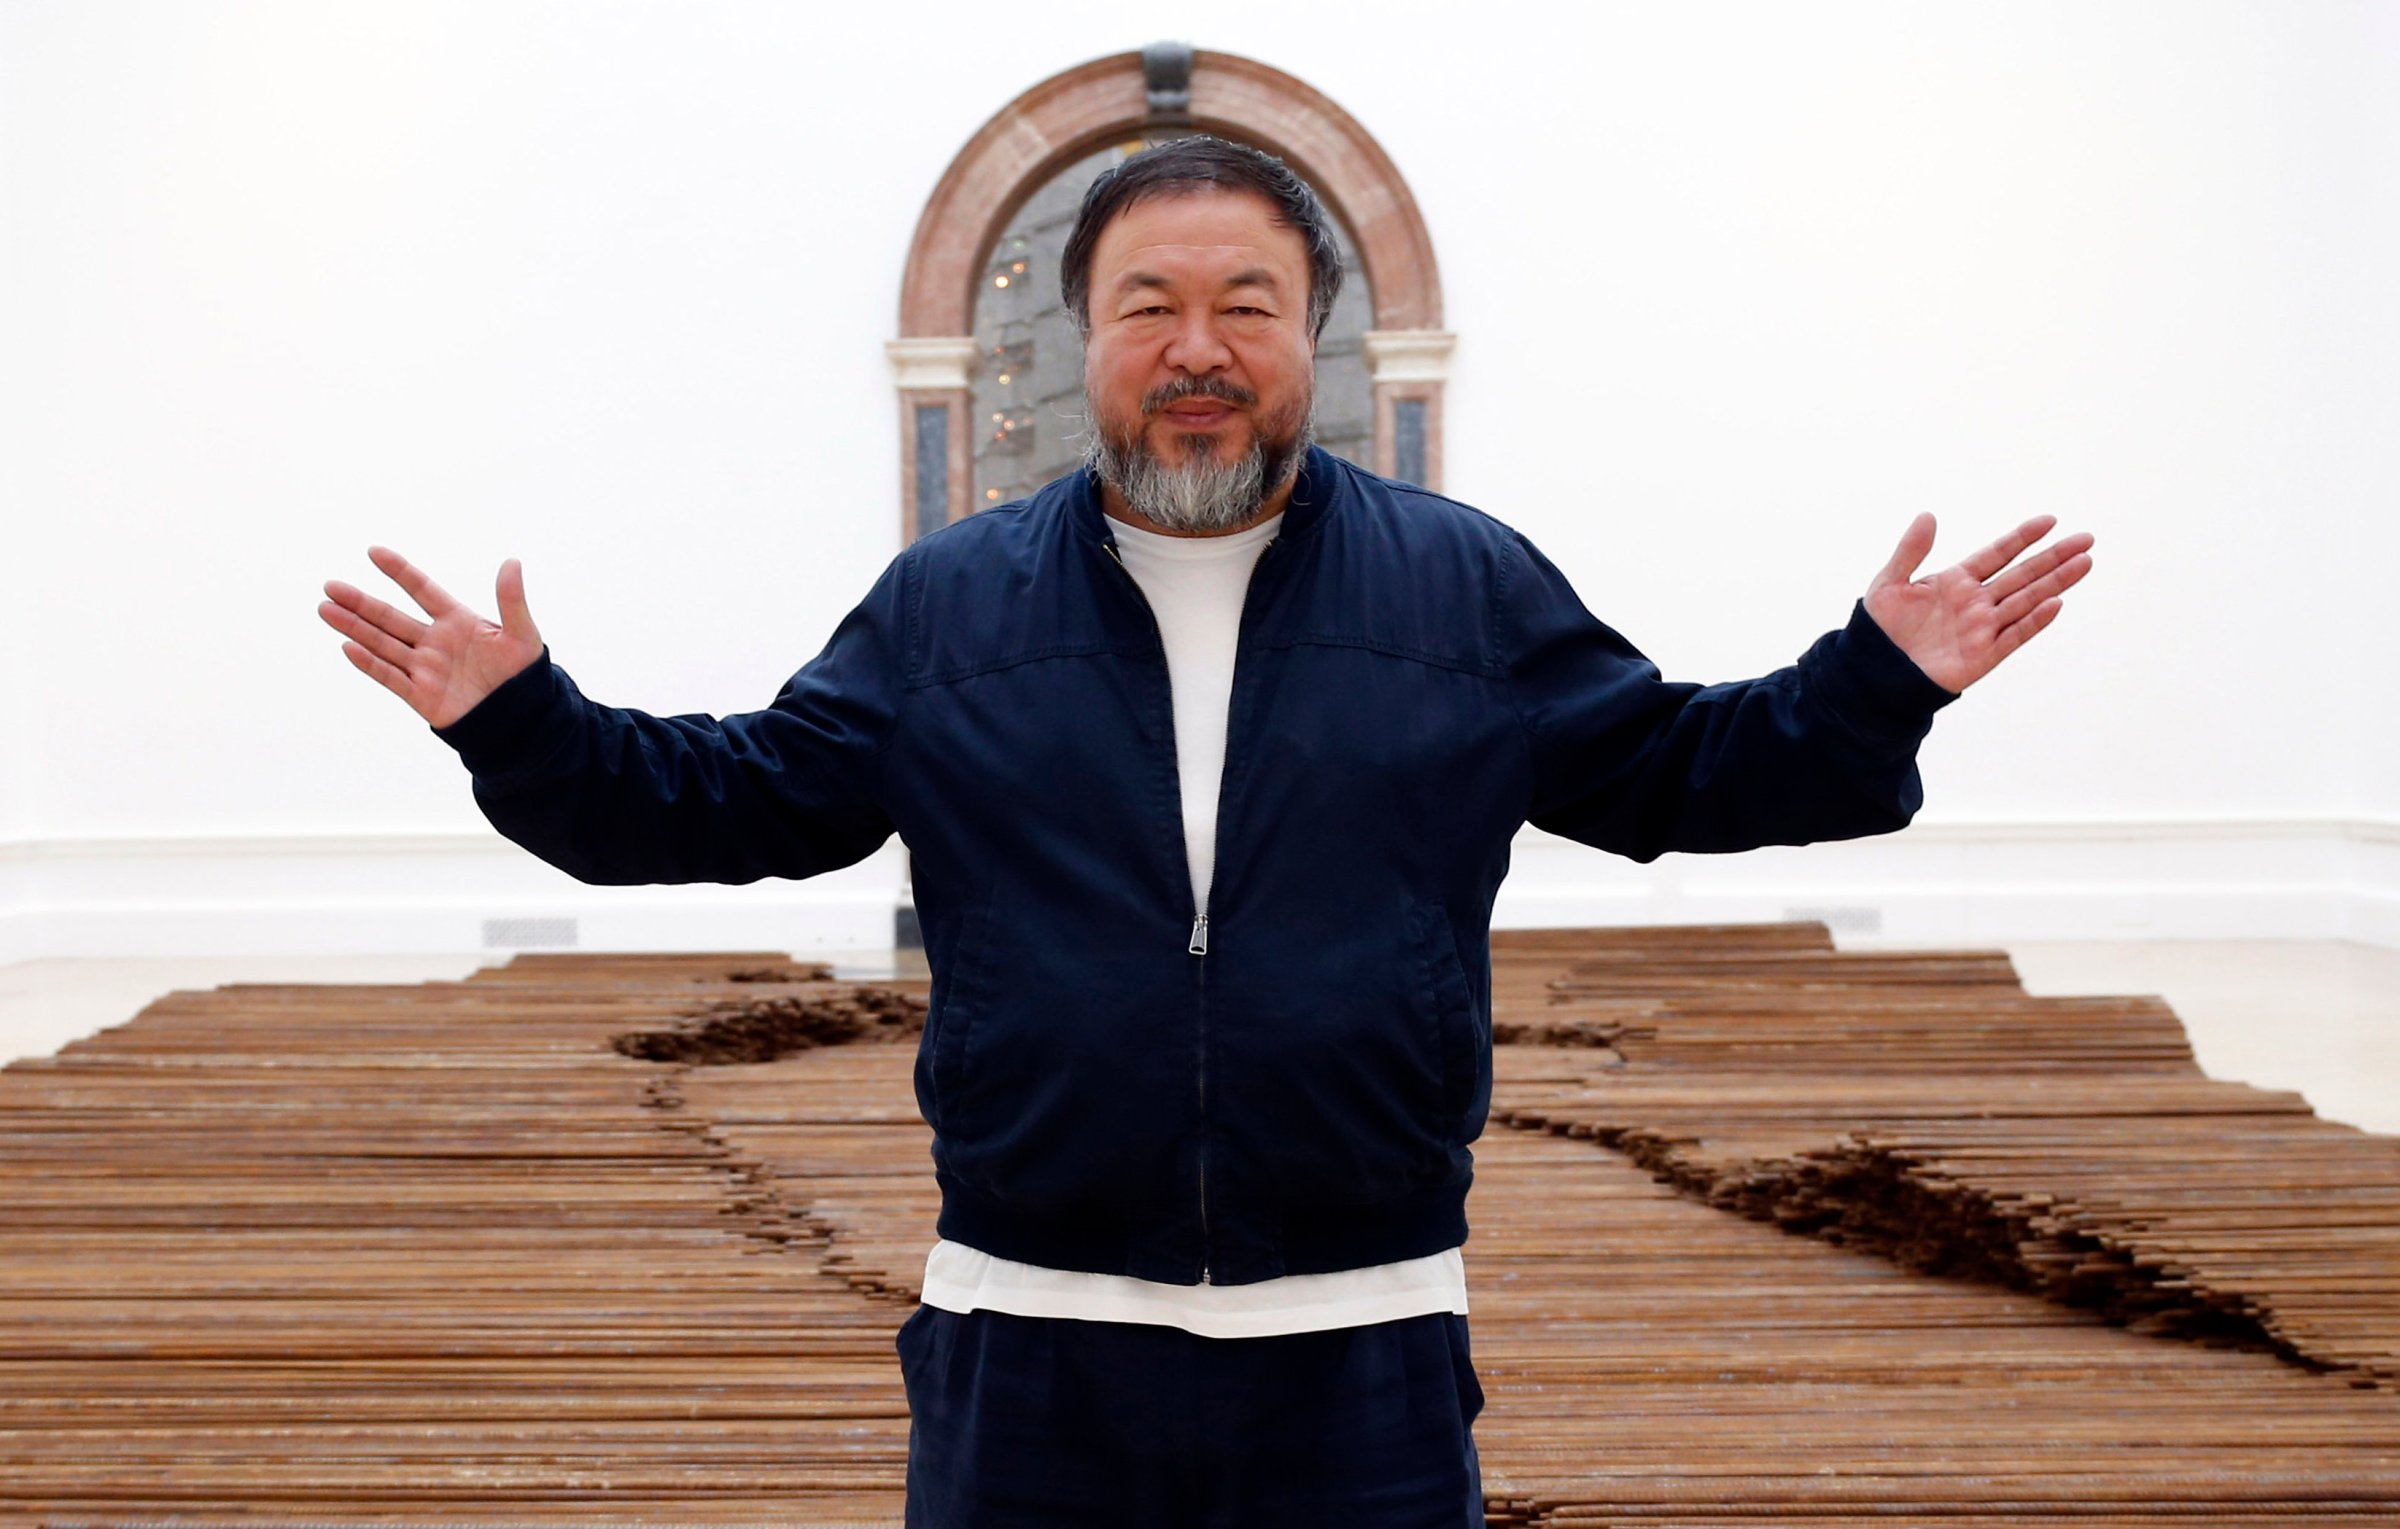 Ai Weiwei stands with his sculpture 'Straight' as he previews works from his landmark art exhibition in London on Sept. 15, 2015.